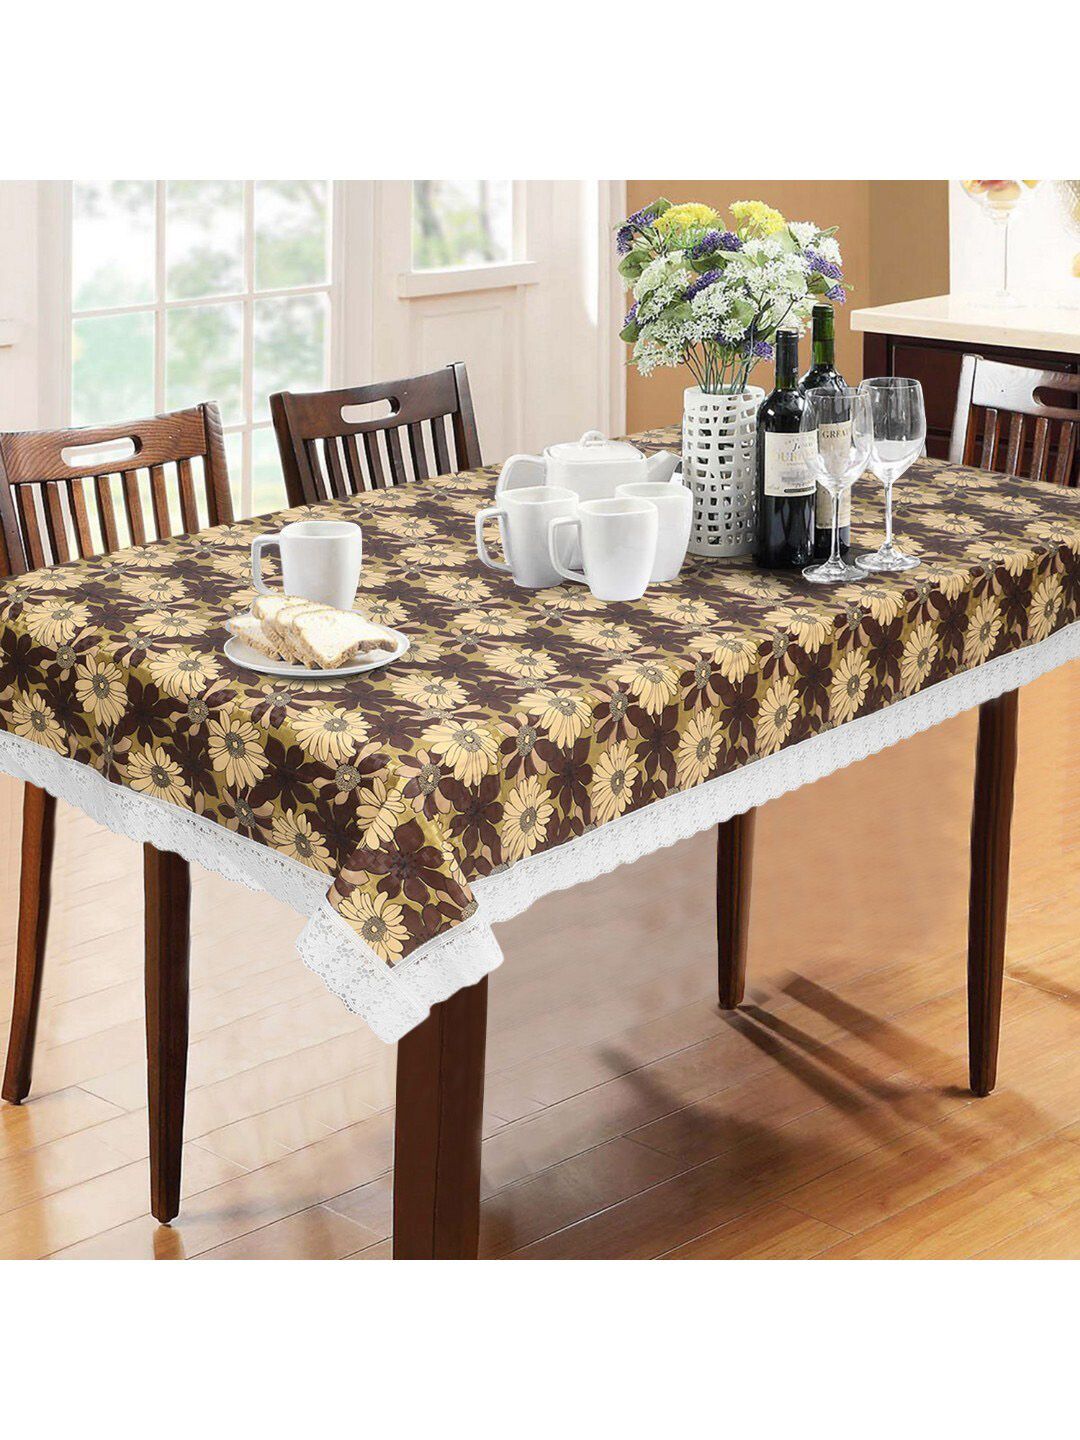 Dakshya Industries Brown Floral Printed 6 Seater Table Cover Price in India